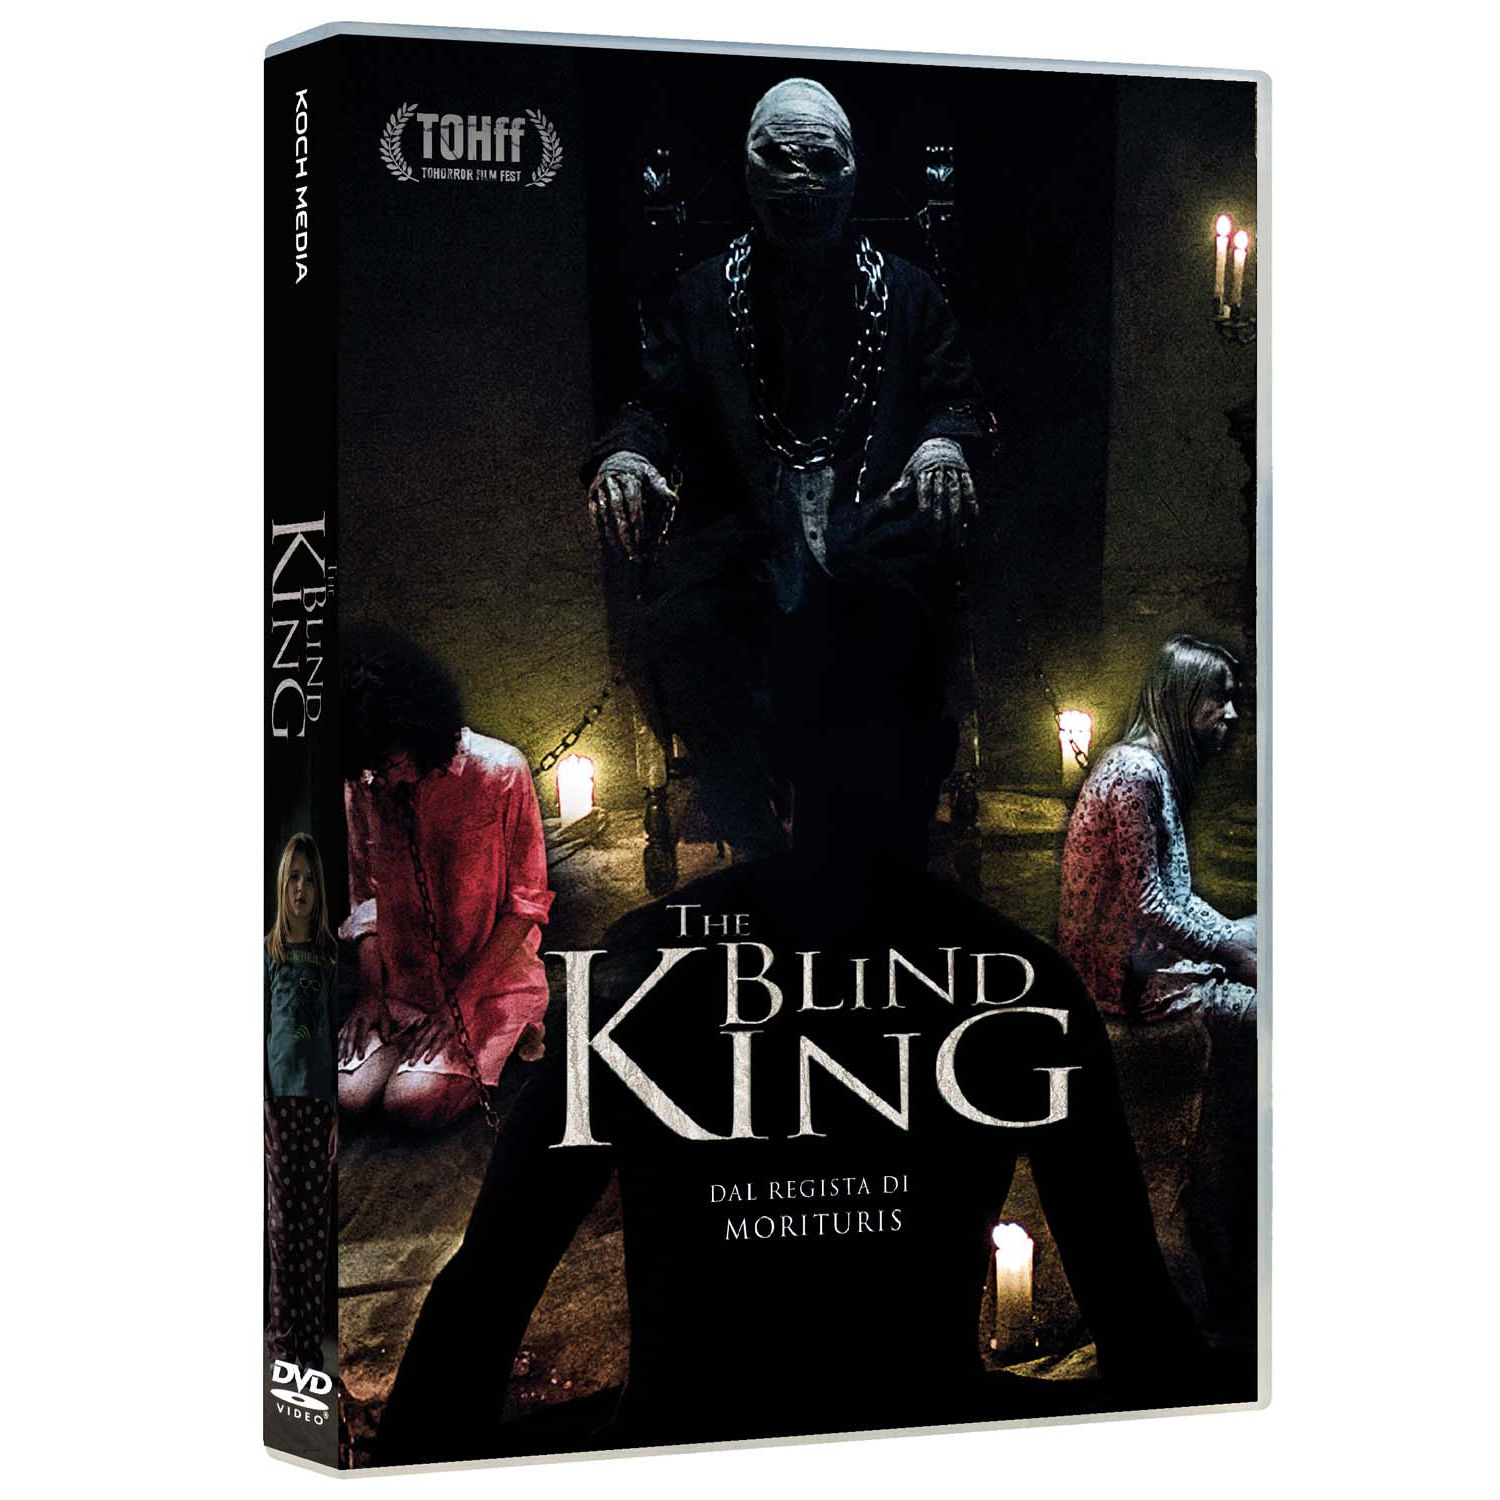 BLIND KING (THE)